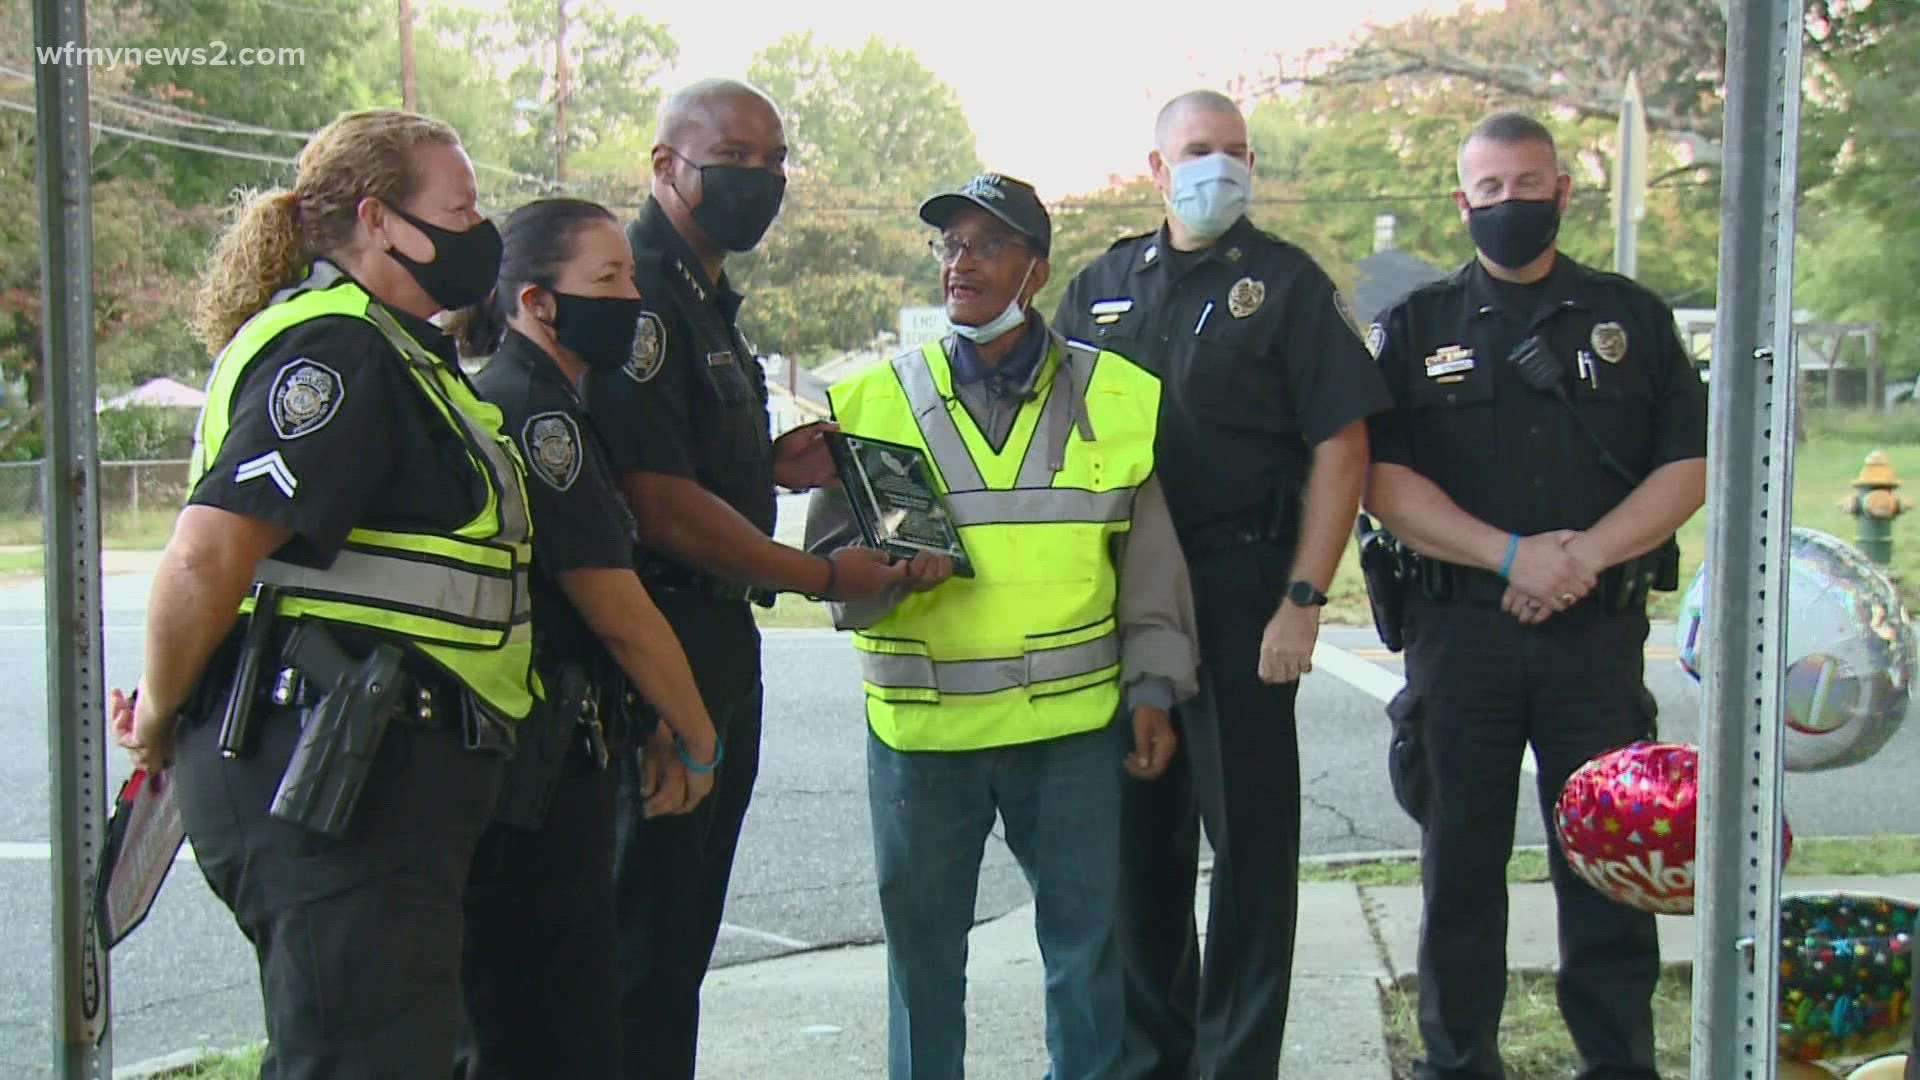 Thomas Faucette turns 100 on Sept. 29. He’s served as a crossing guard in Greensboro for decades.